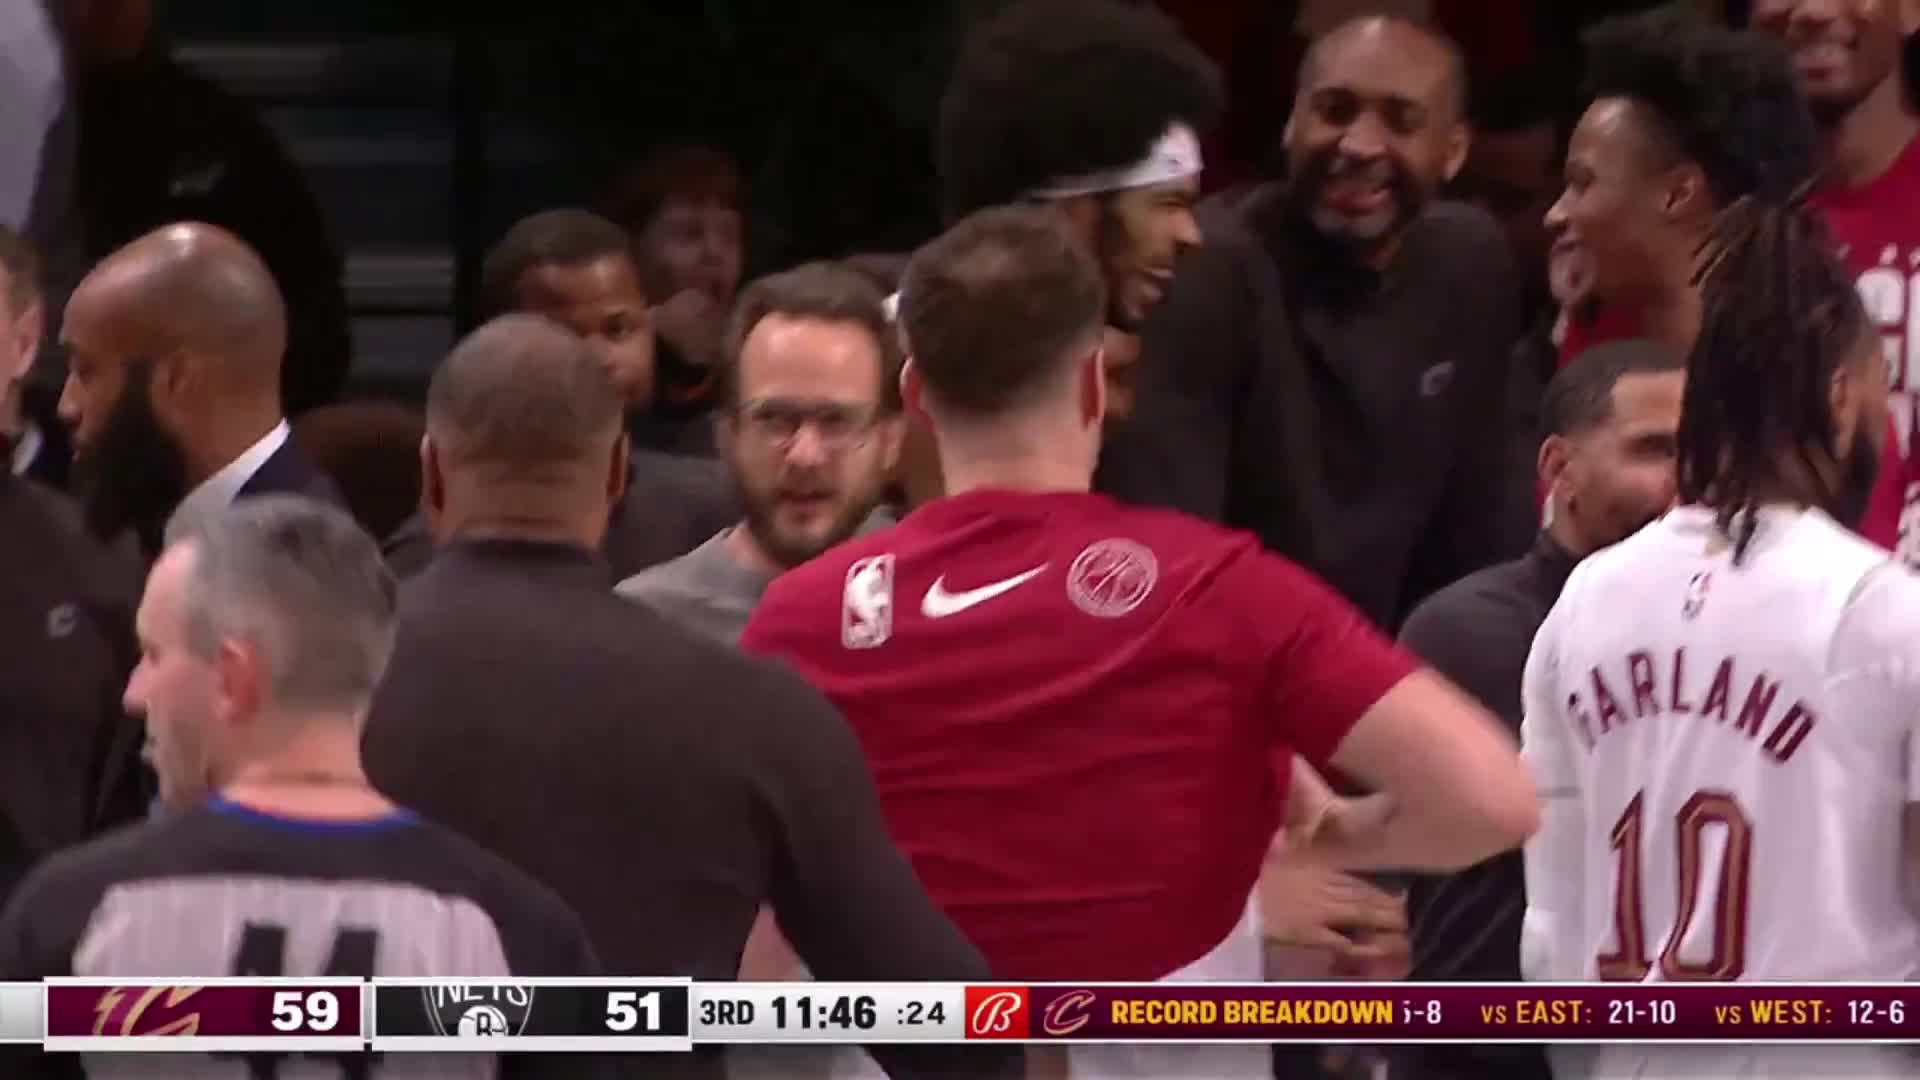 Watch Jarrett Allen and Ben Simmons get into a scuffle after Simmons